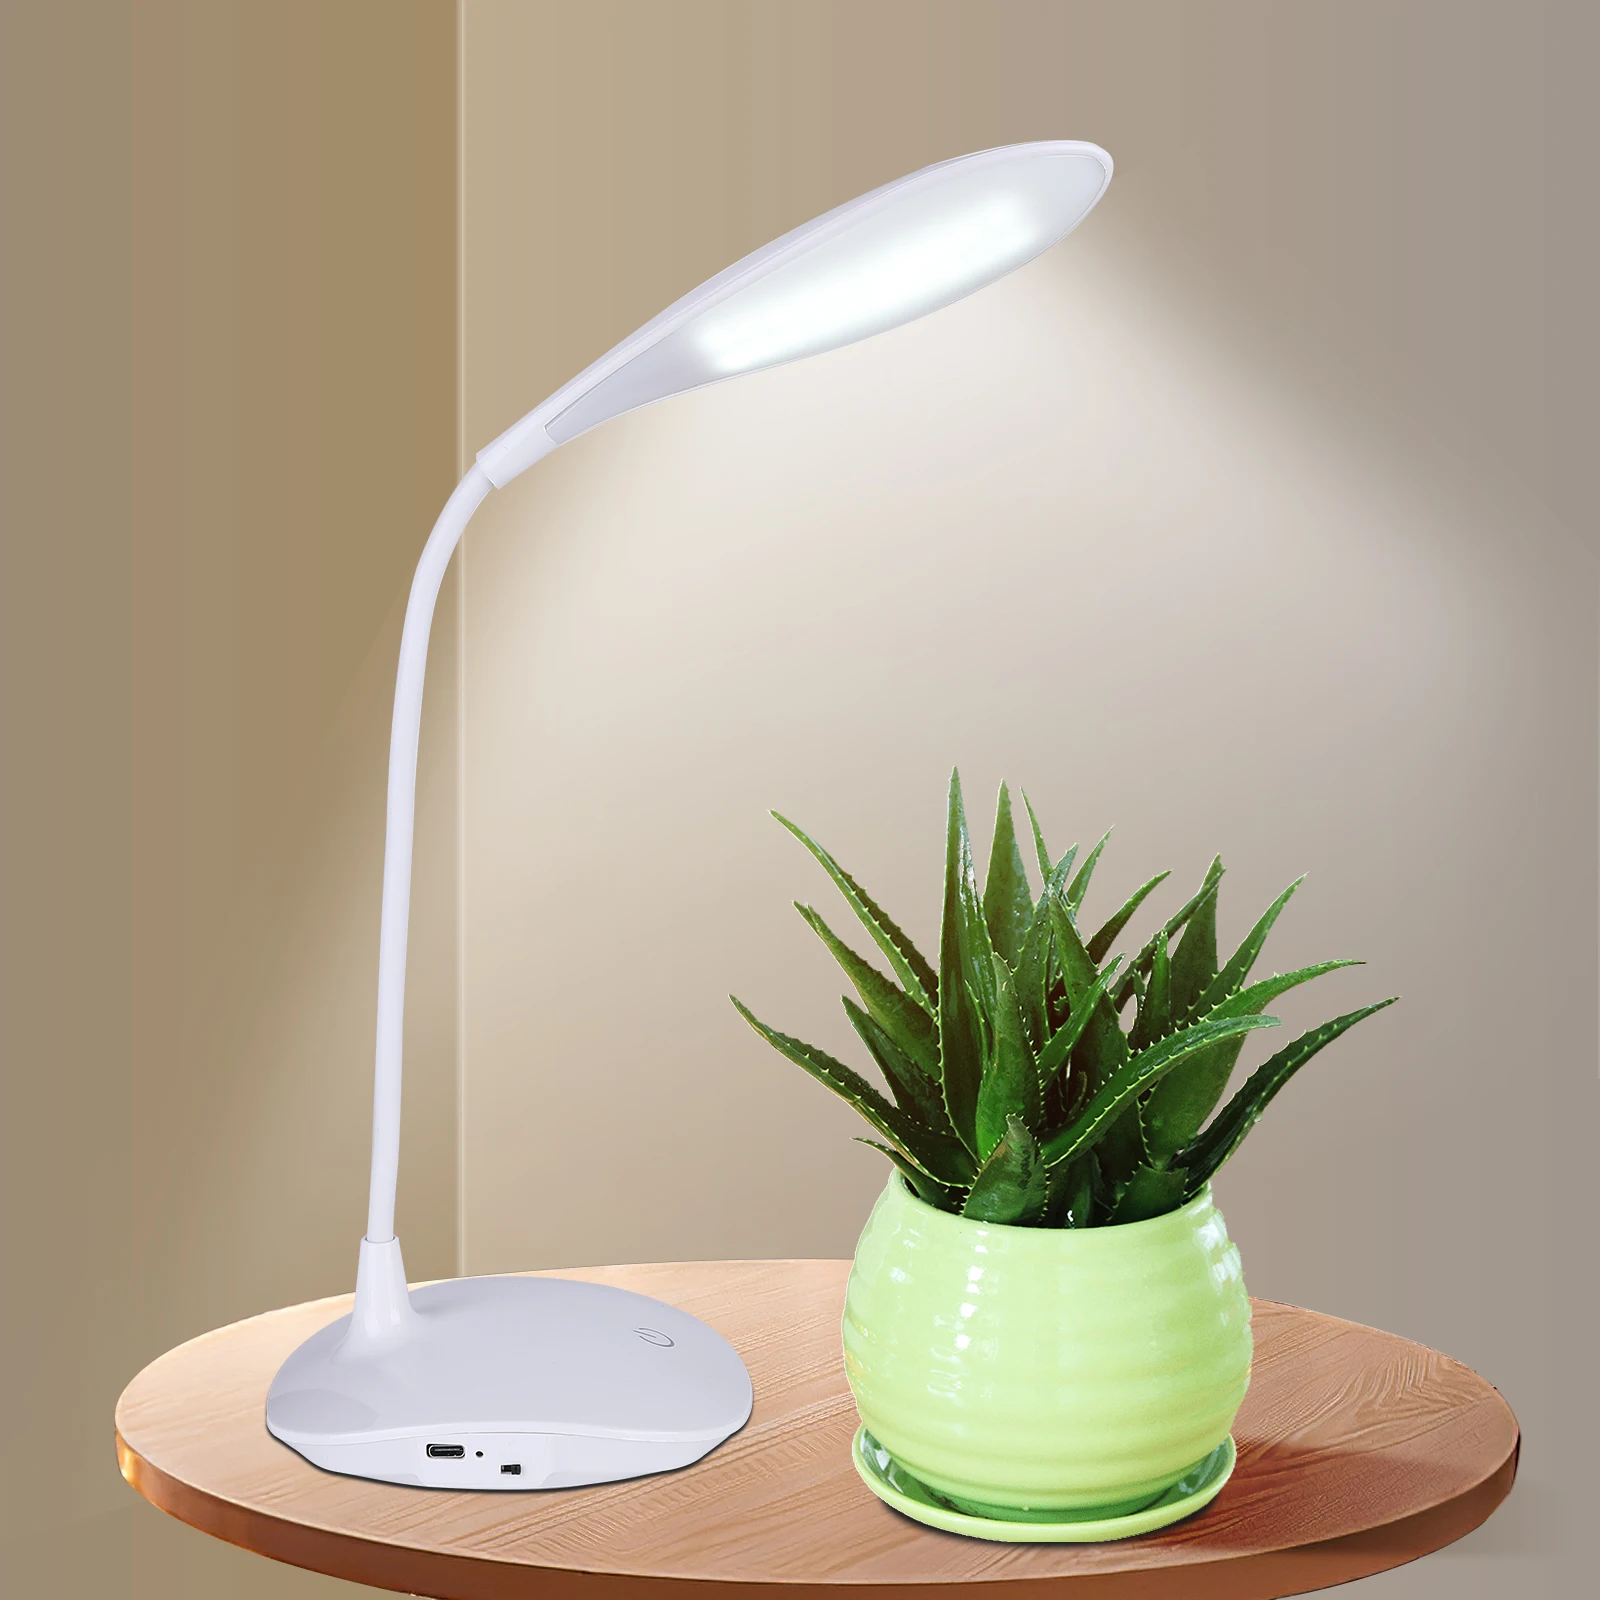 

LED Desk Lamp Foldable Dimmable Reading Light With 3 Color Temperatures And 3 Level Brightness Flexible Gooseneck Bedside Lamps